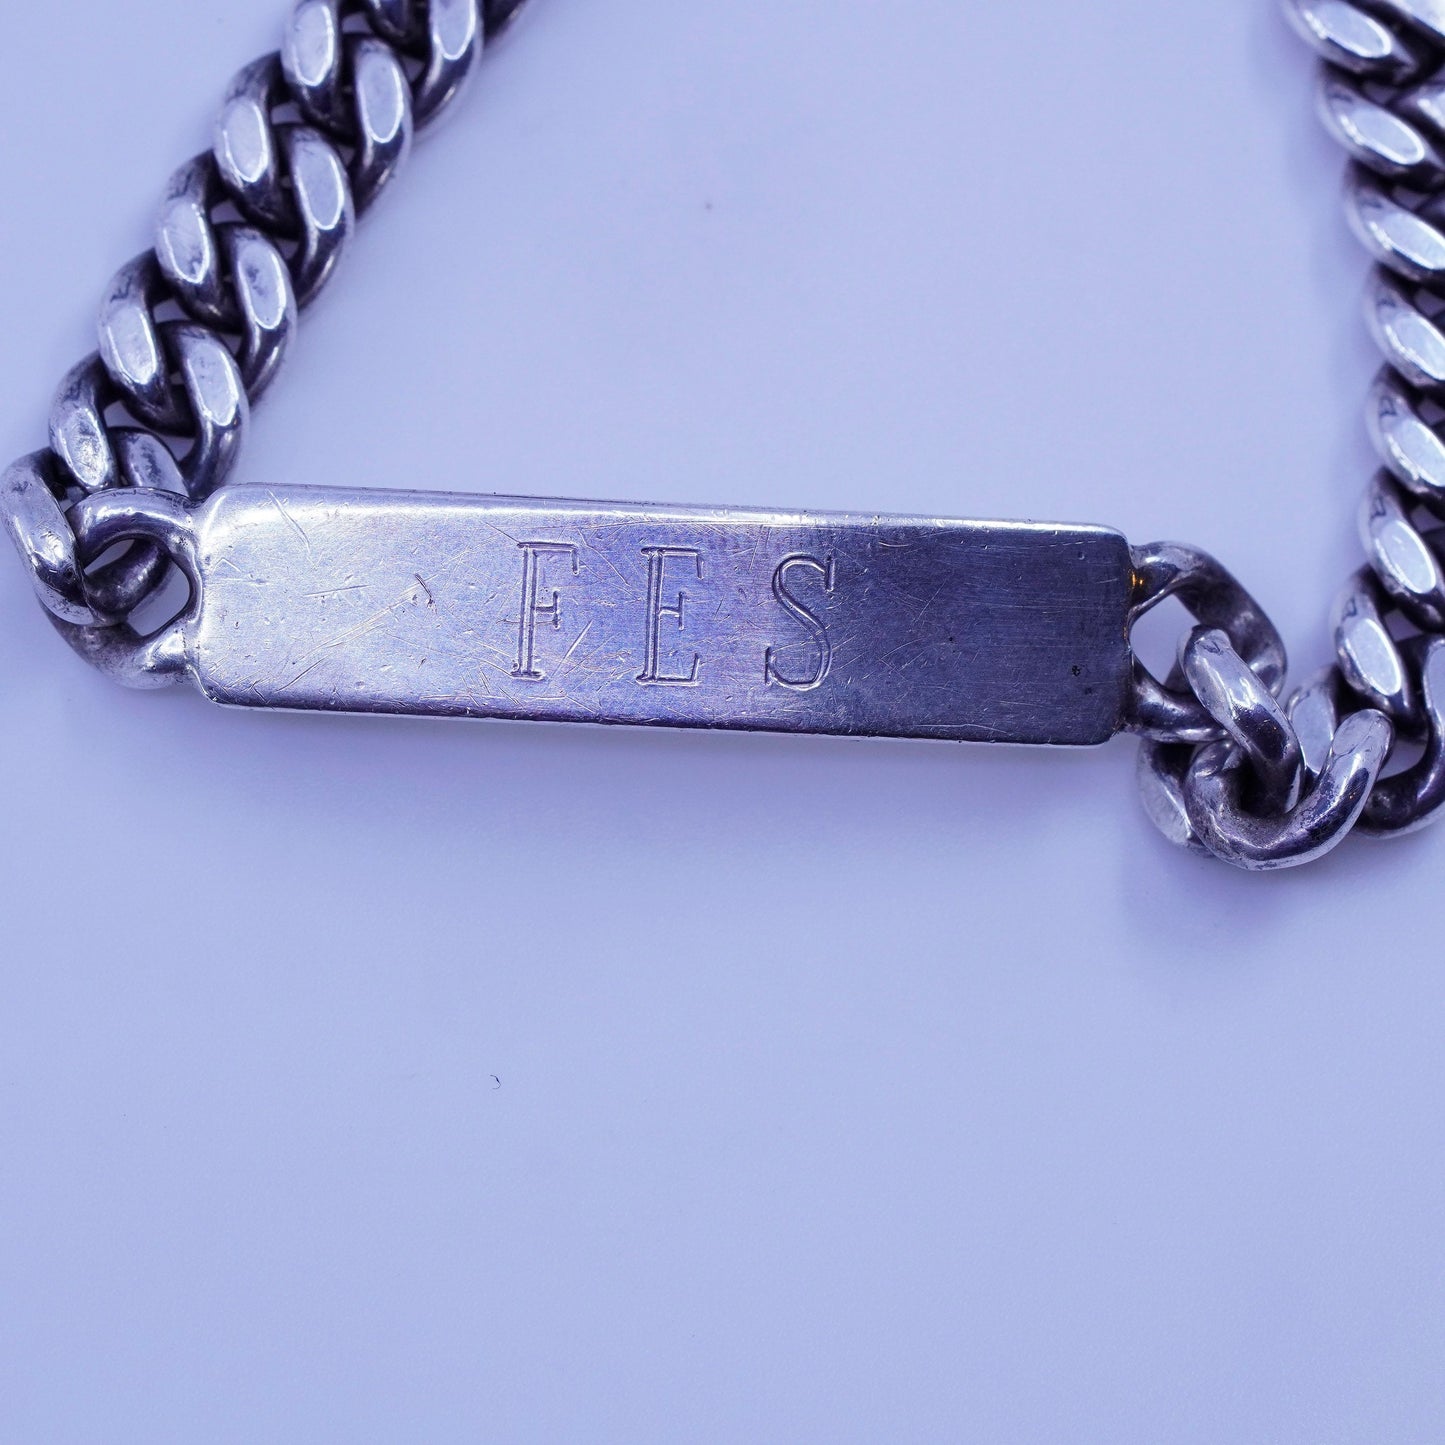 7.5”, doskow Sterling silver bracelet, 925 curb chain name tag engraved “FES”